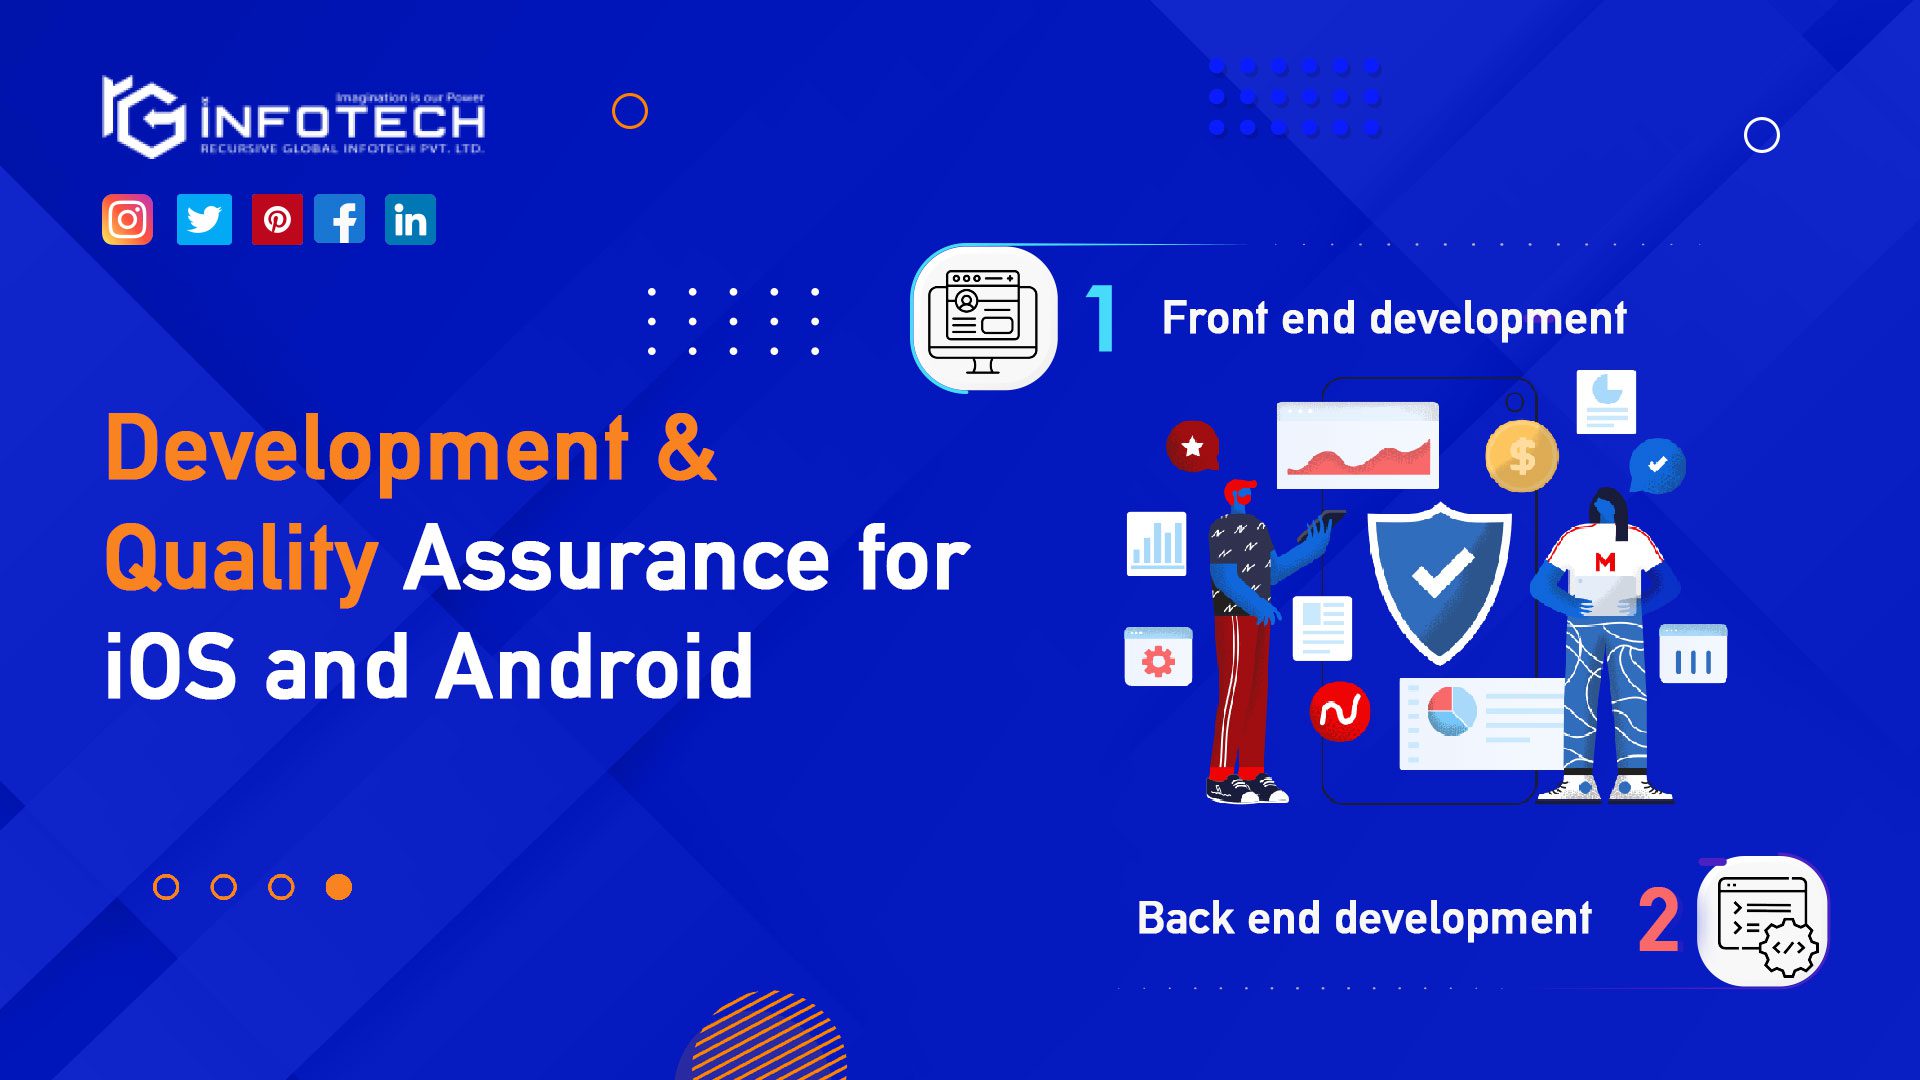 Development-&-Quality-Assurance-for-iOS-and-Android